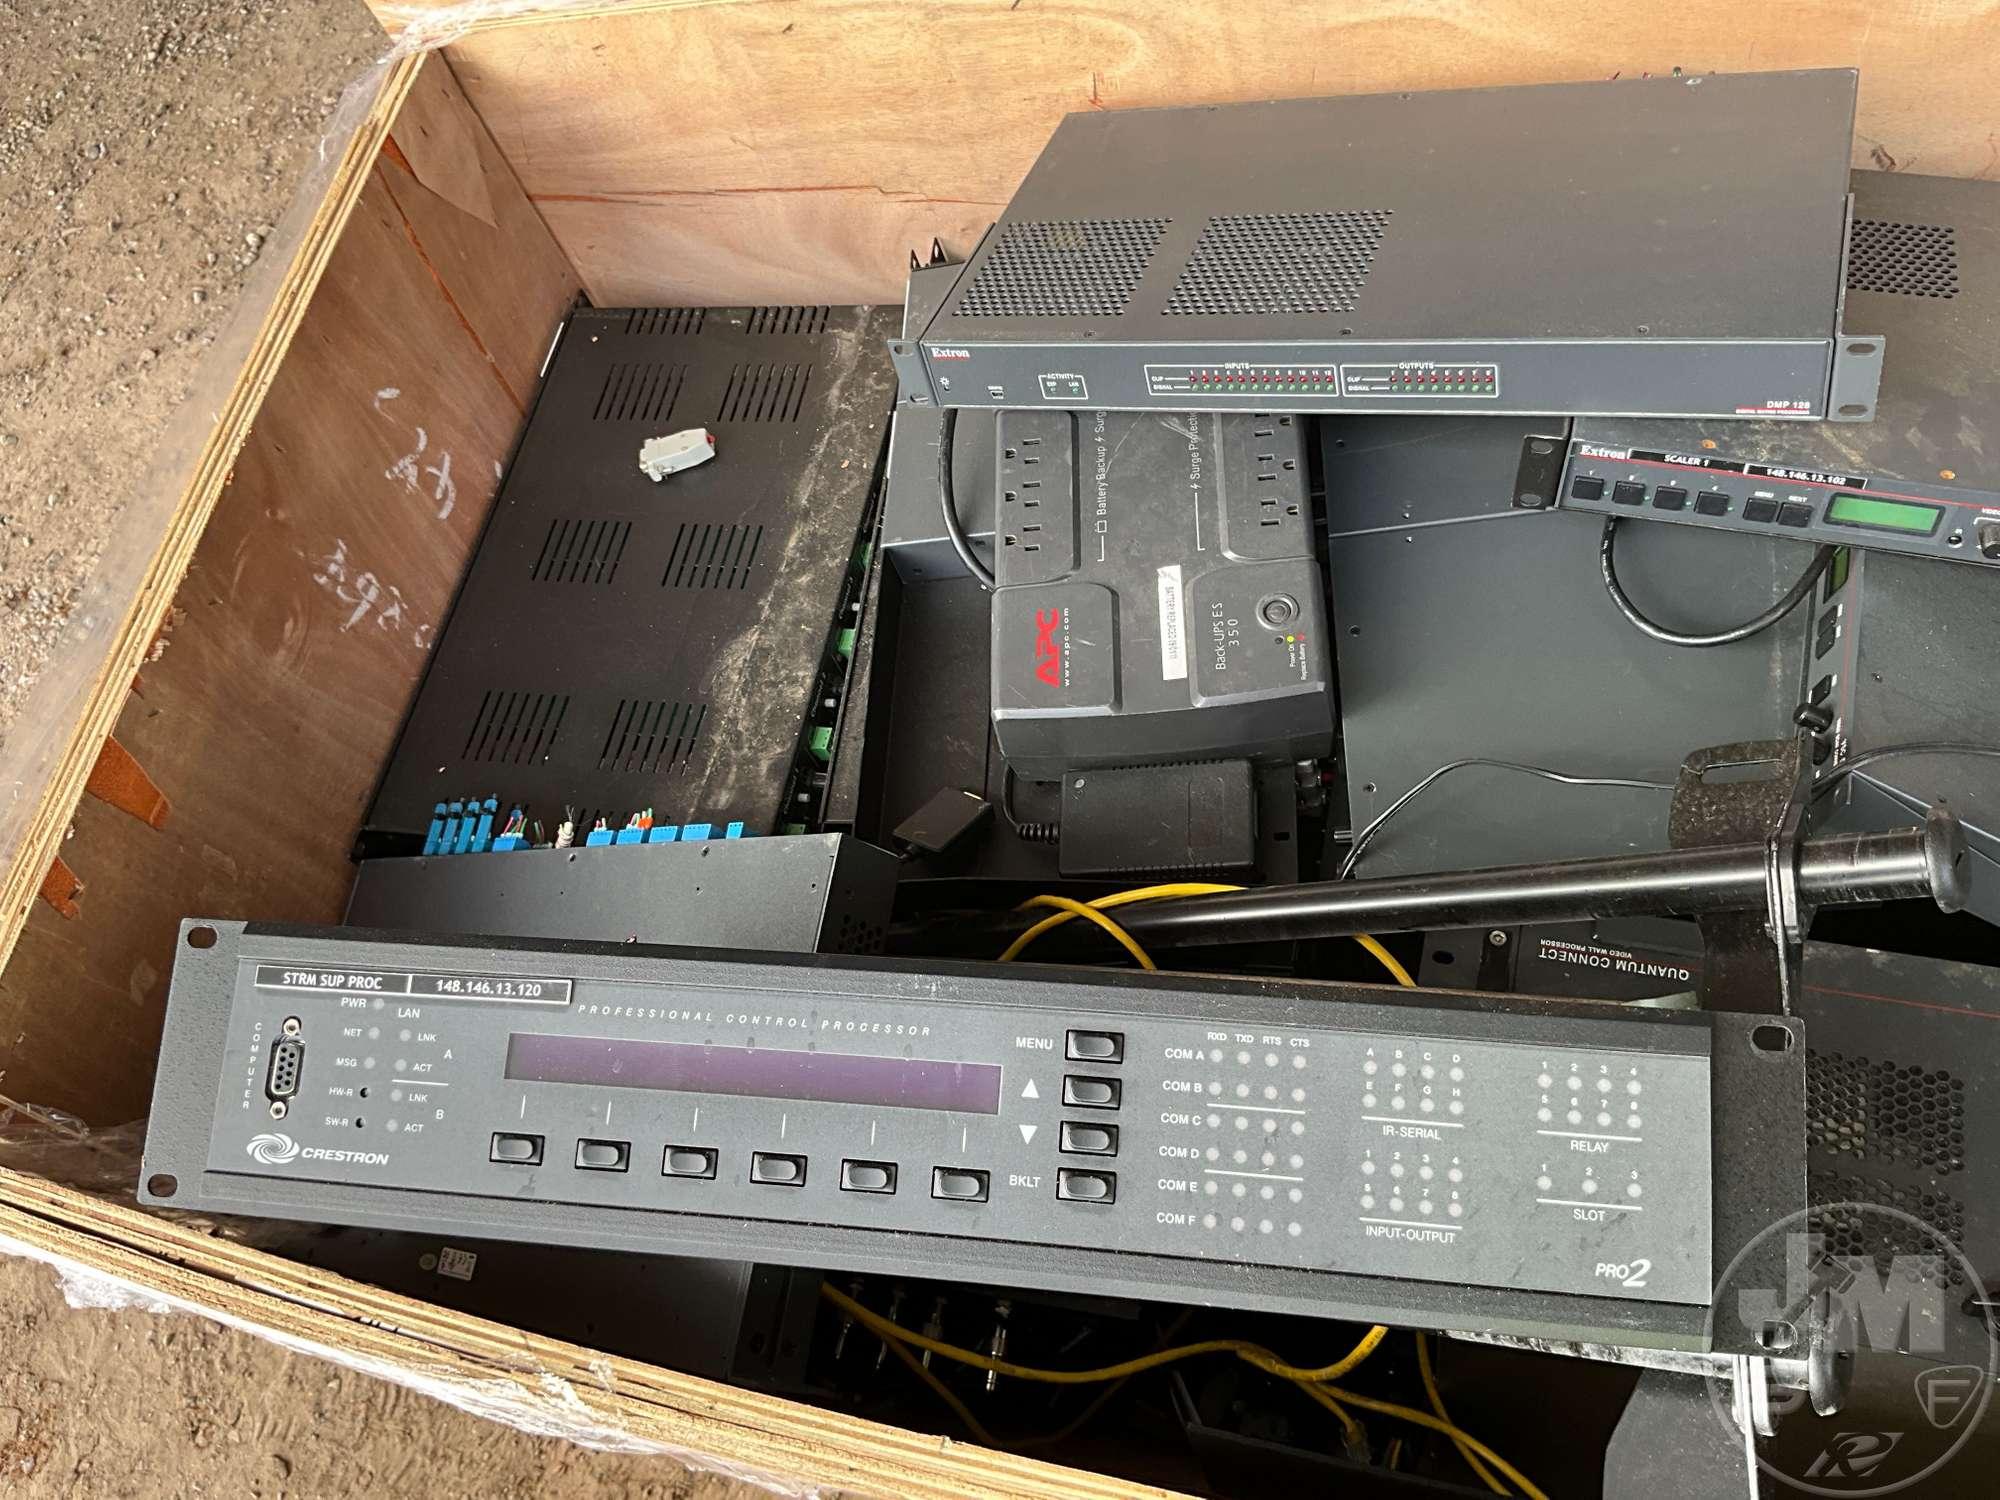 1 CRATE OF VARIOUS ELECTRONIC ITEMS , APC BATTERY BACKUP&